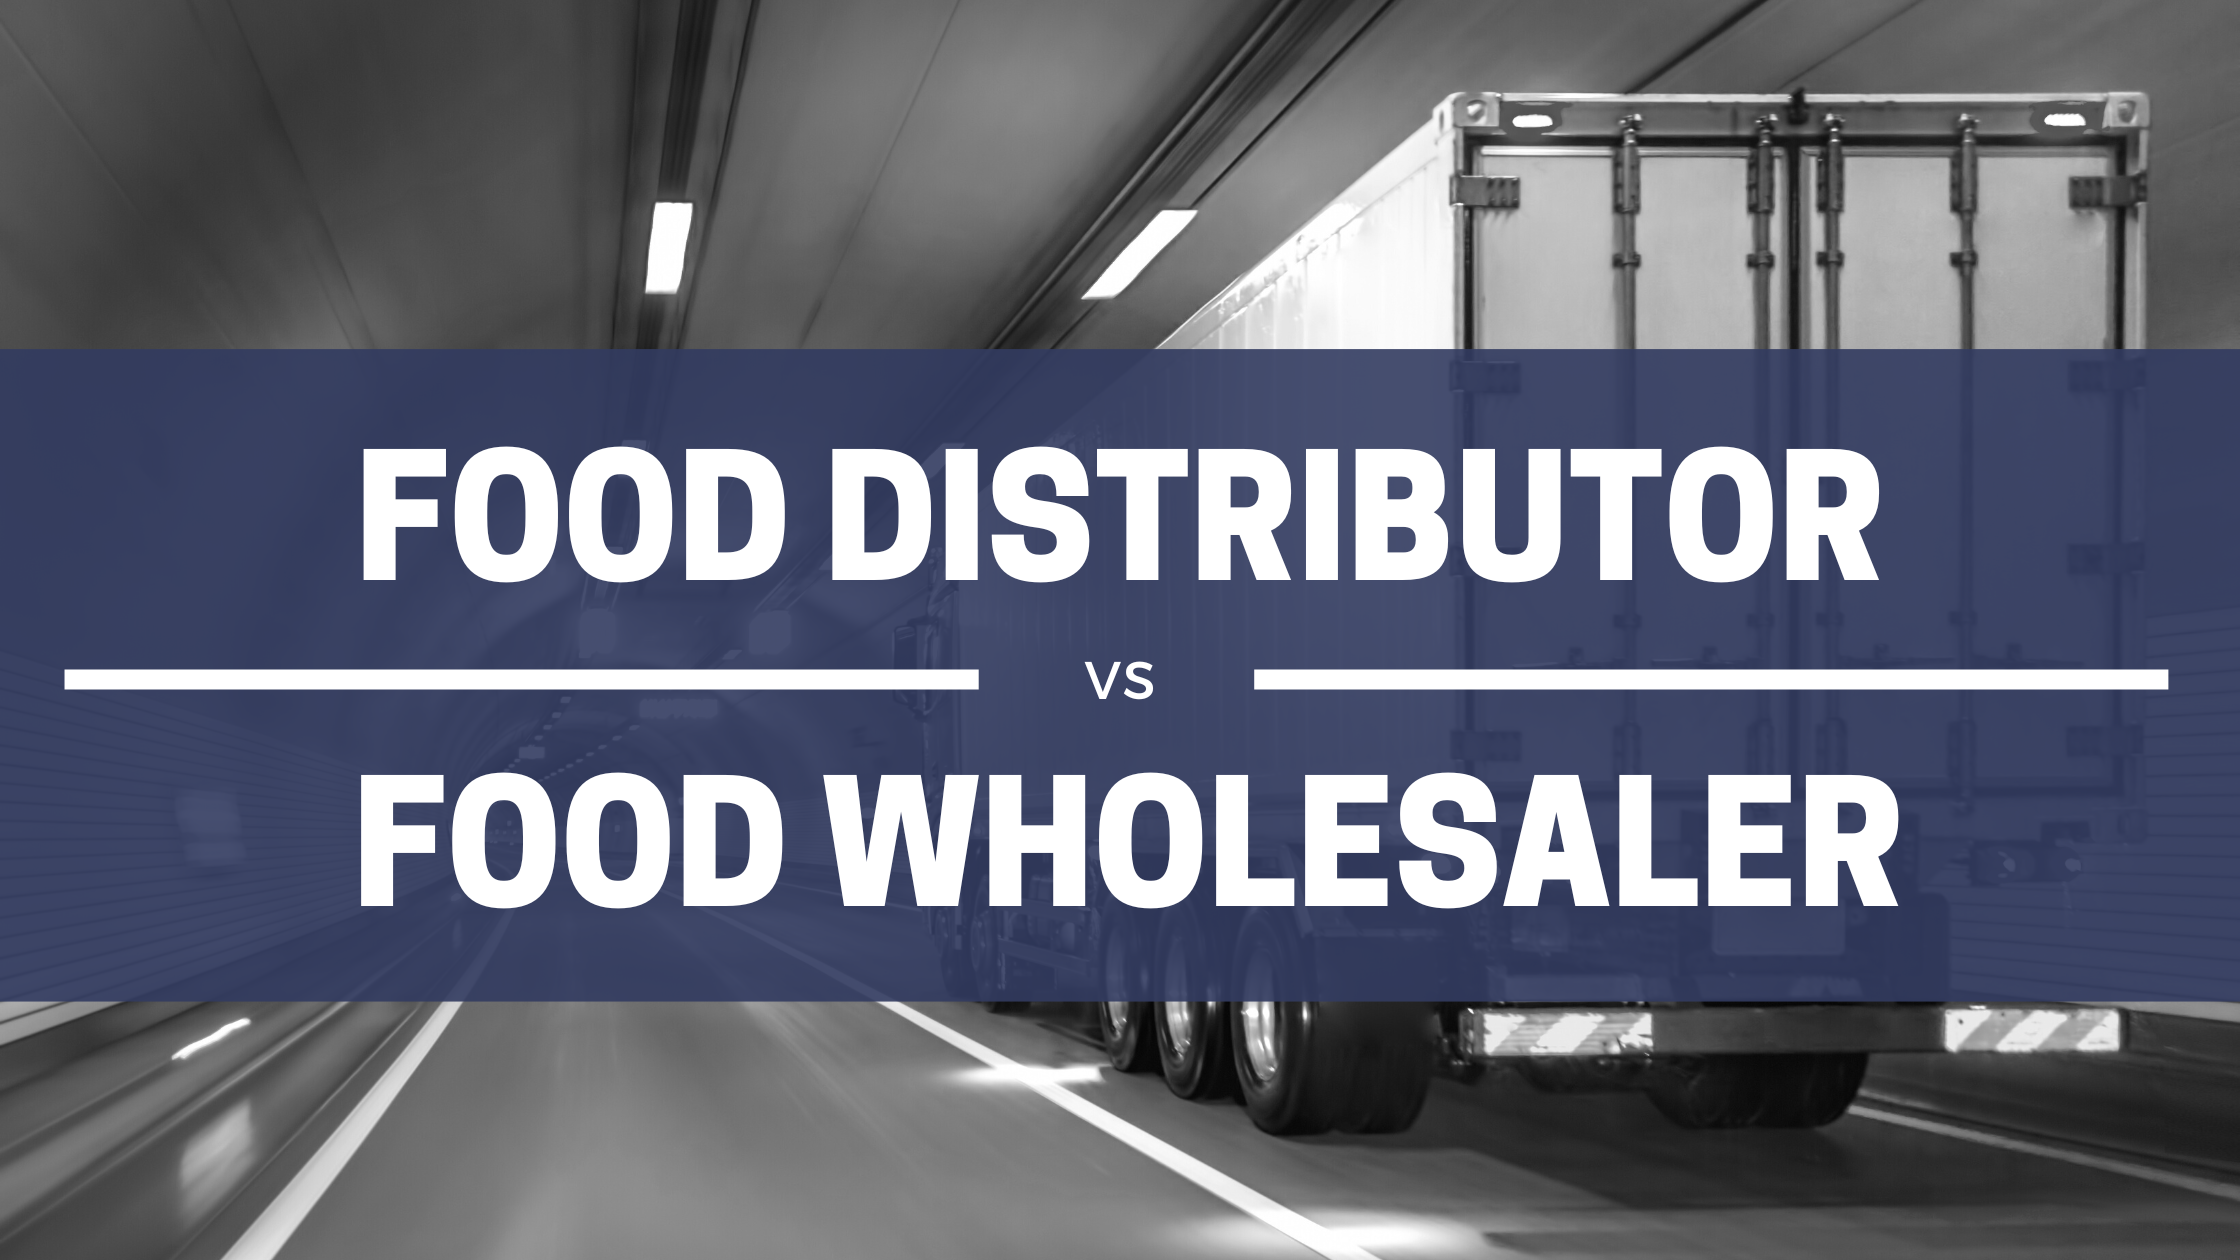 Food Distributor vs. Food Wholesaler: What's the Difference?